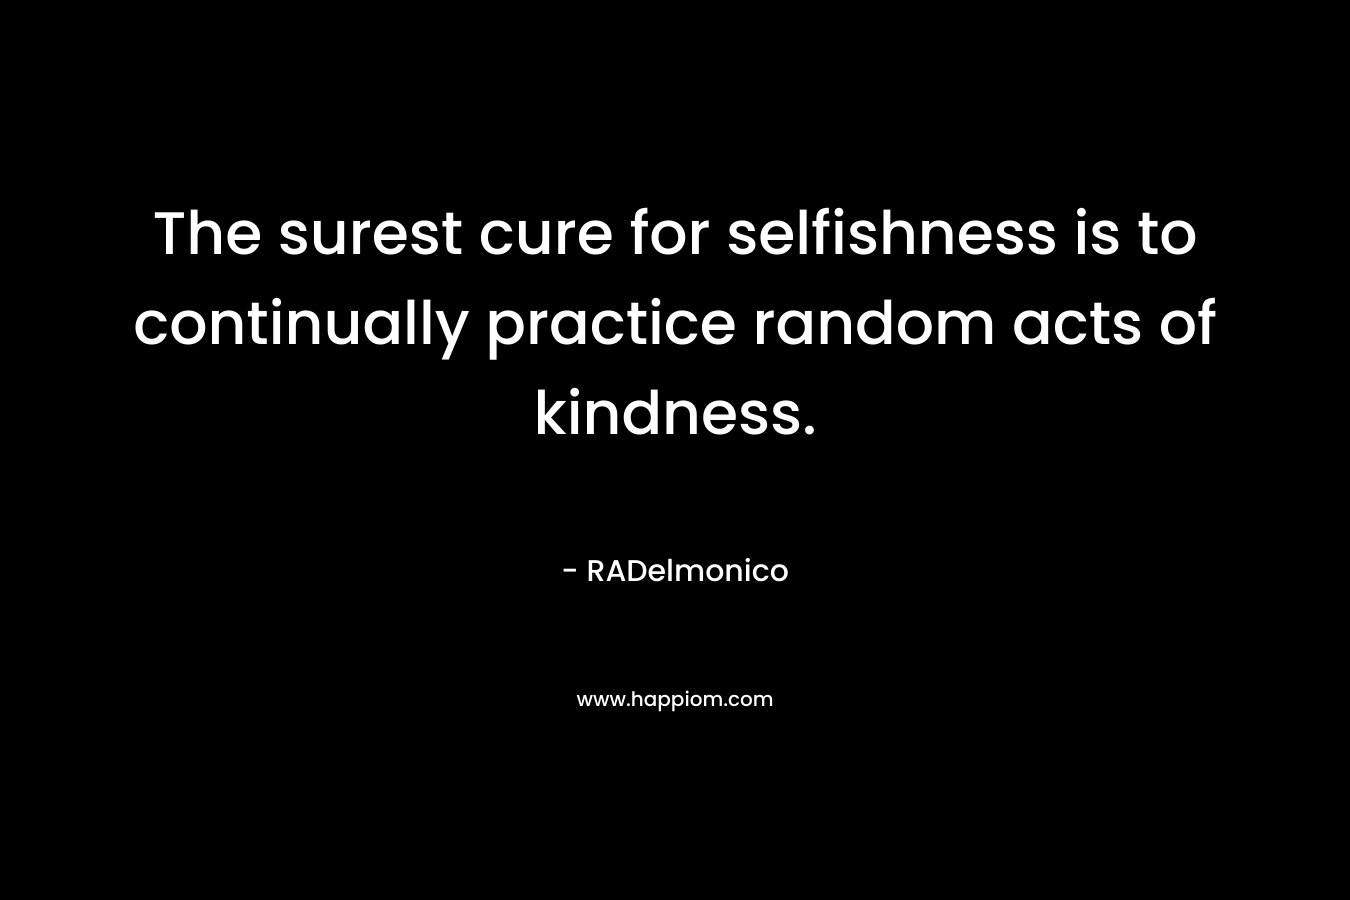 The surest cure for selfishness is to continually practice random acts of kindness.